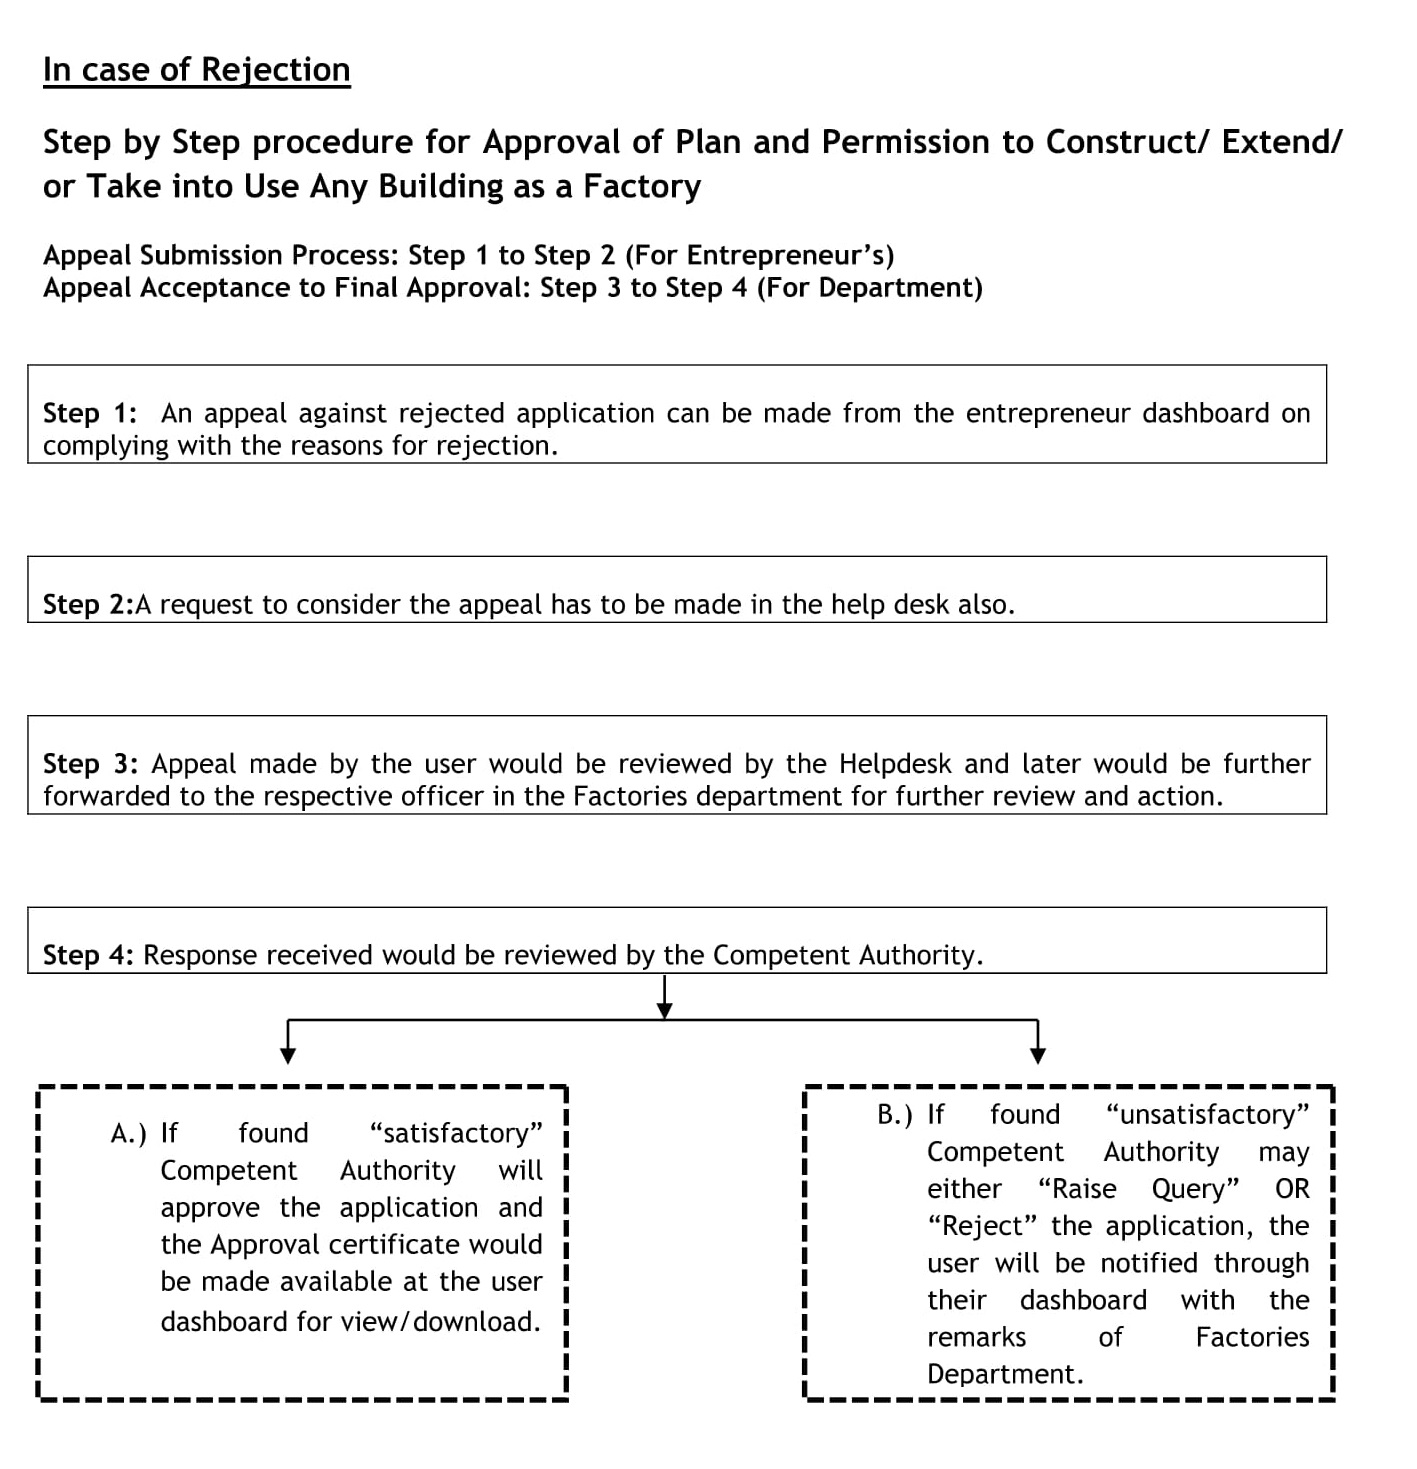 Plan Approval Step by Step Procedure Image